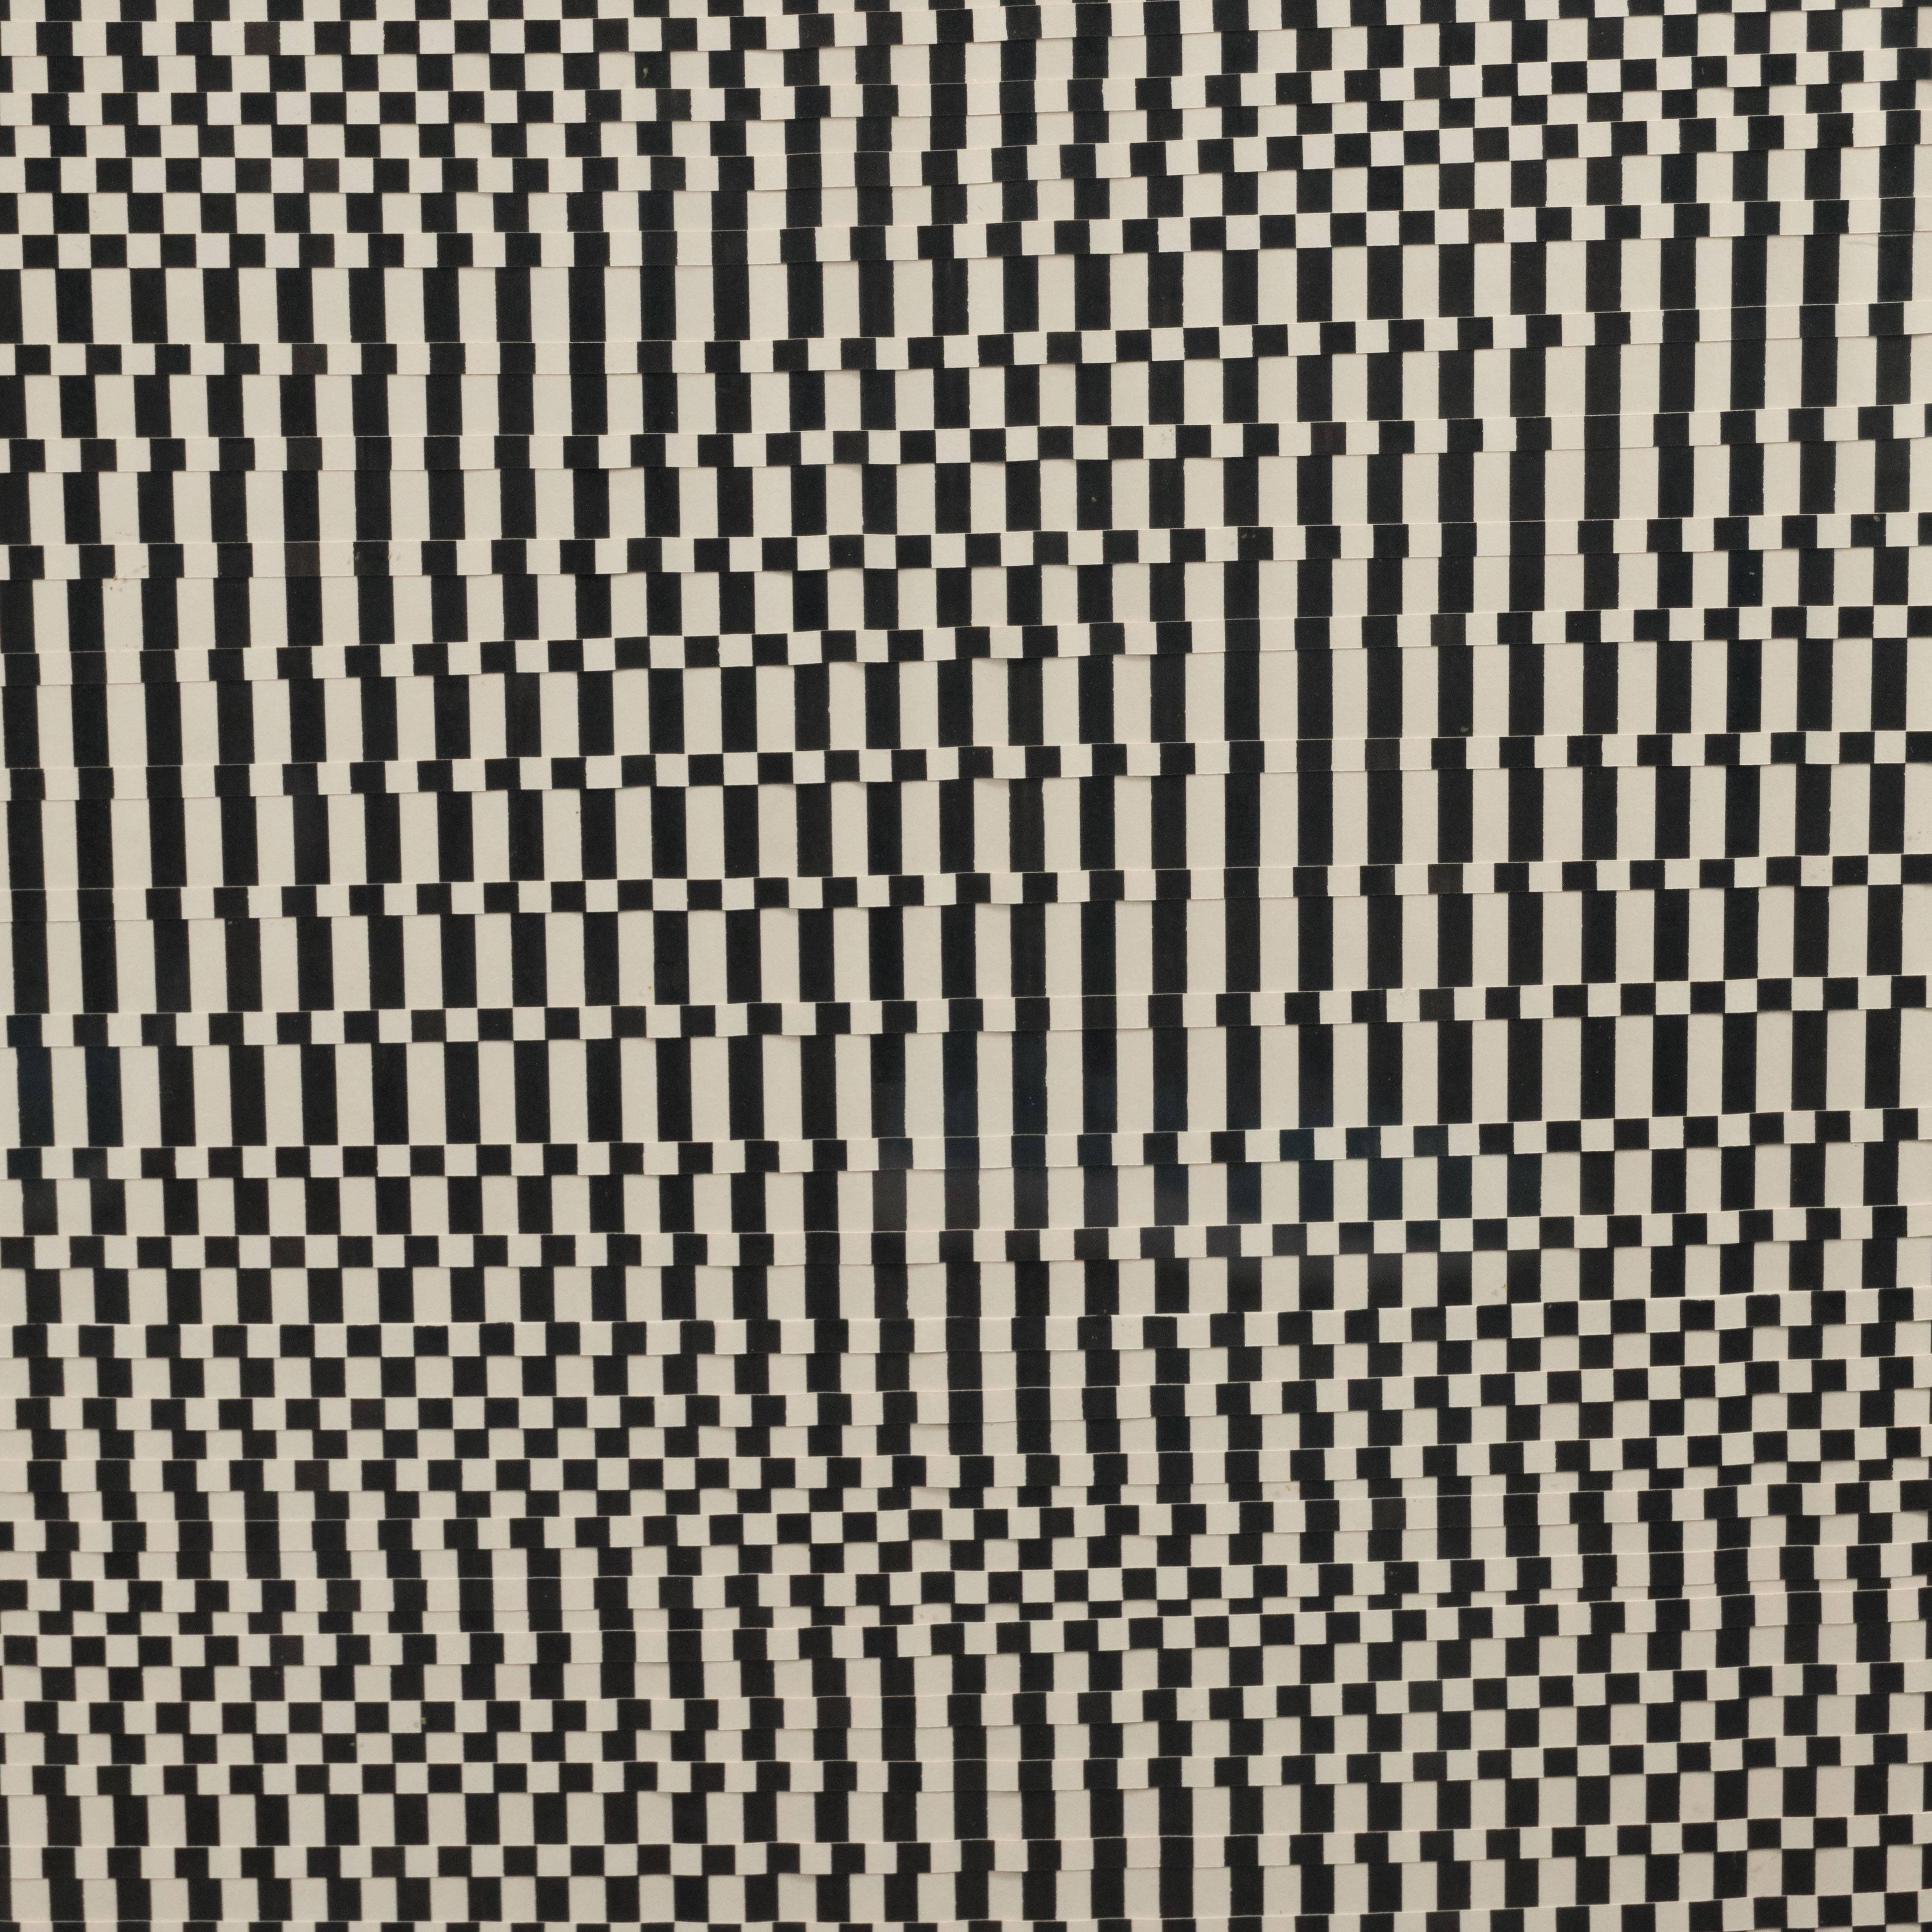 This stunning collage was realized in a monochrome palette in the style of Bridget Riley, circa 1965. Consisting of a woven tapestry of paper laid on board, the artist creates a composition full of movement and dynamic energy through minimal means.